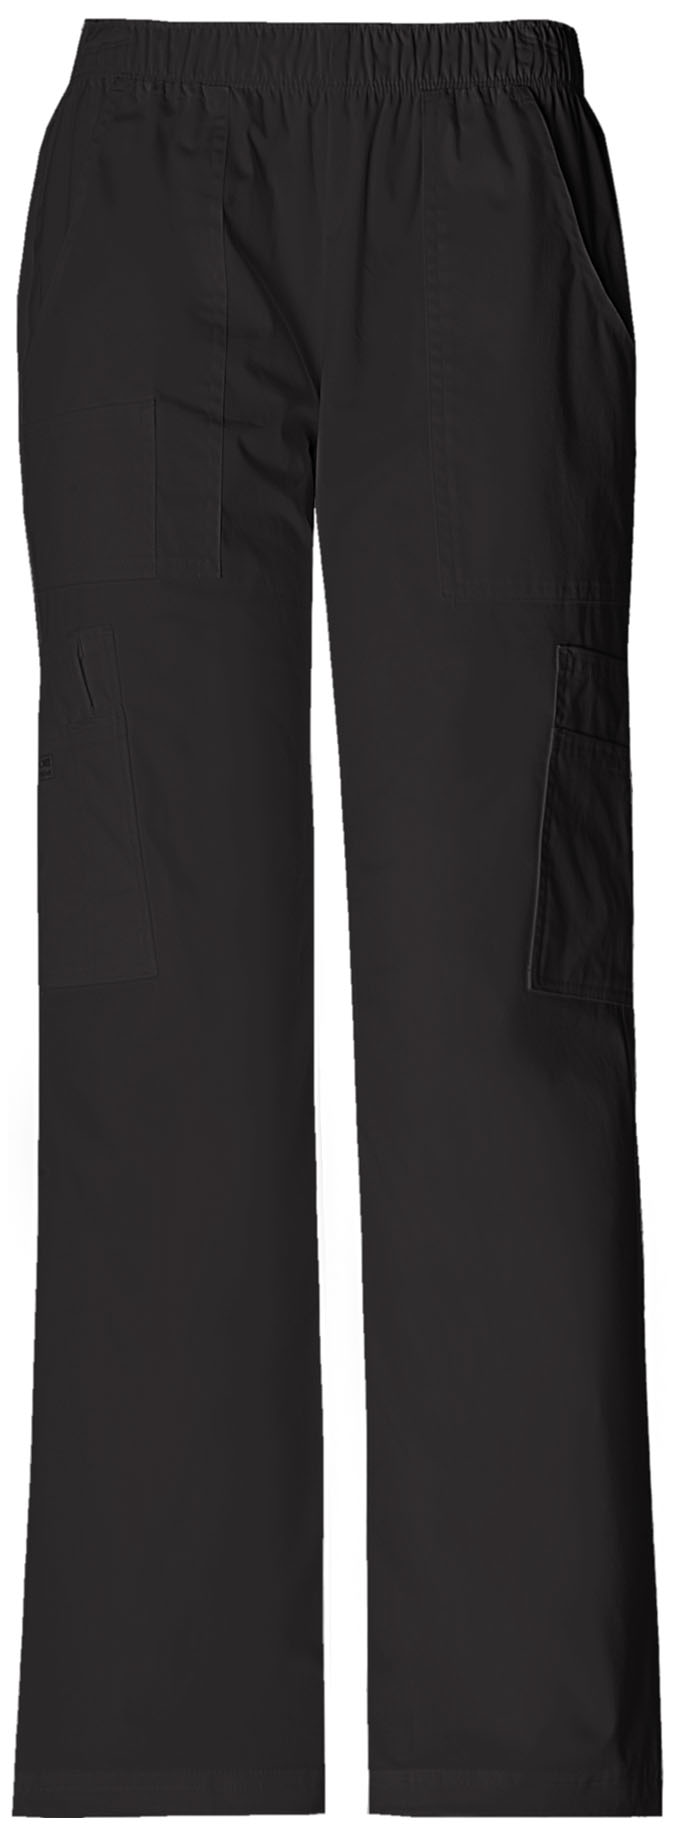 Cherokee Ladies WW Core Stretch  Mid Rise Pull-On Pant Cargo Pant 4005